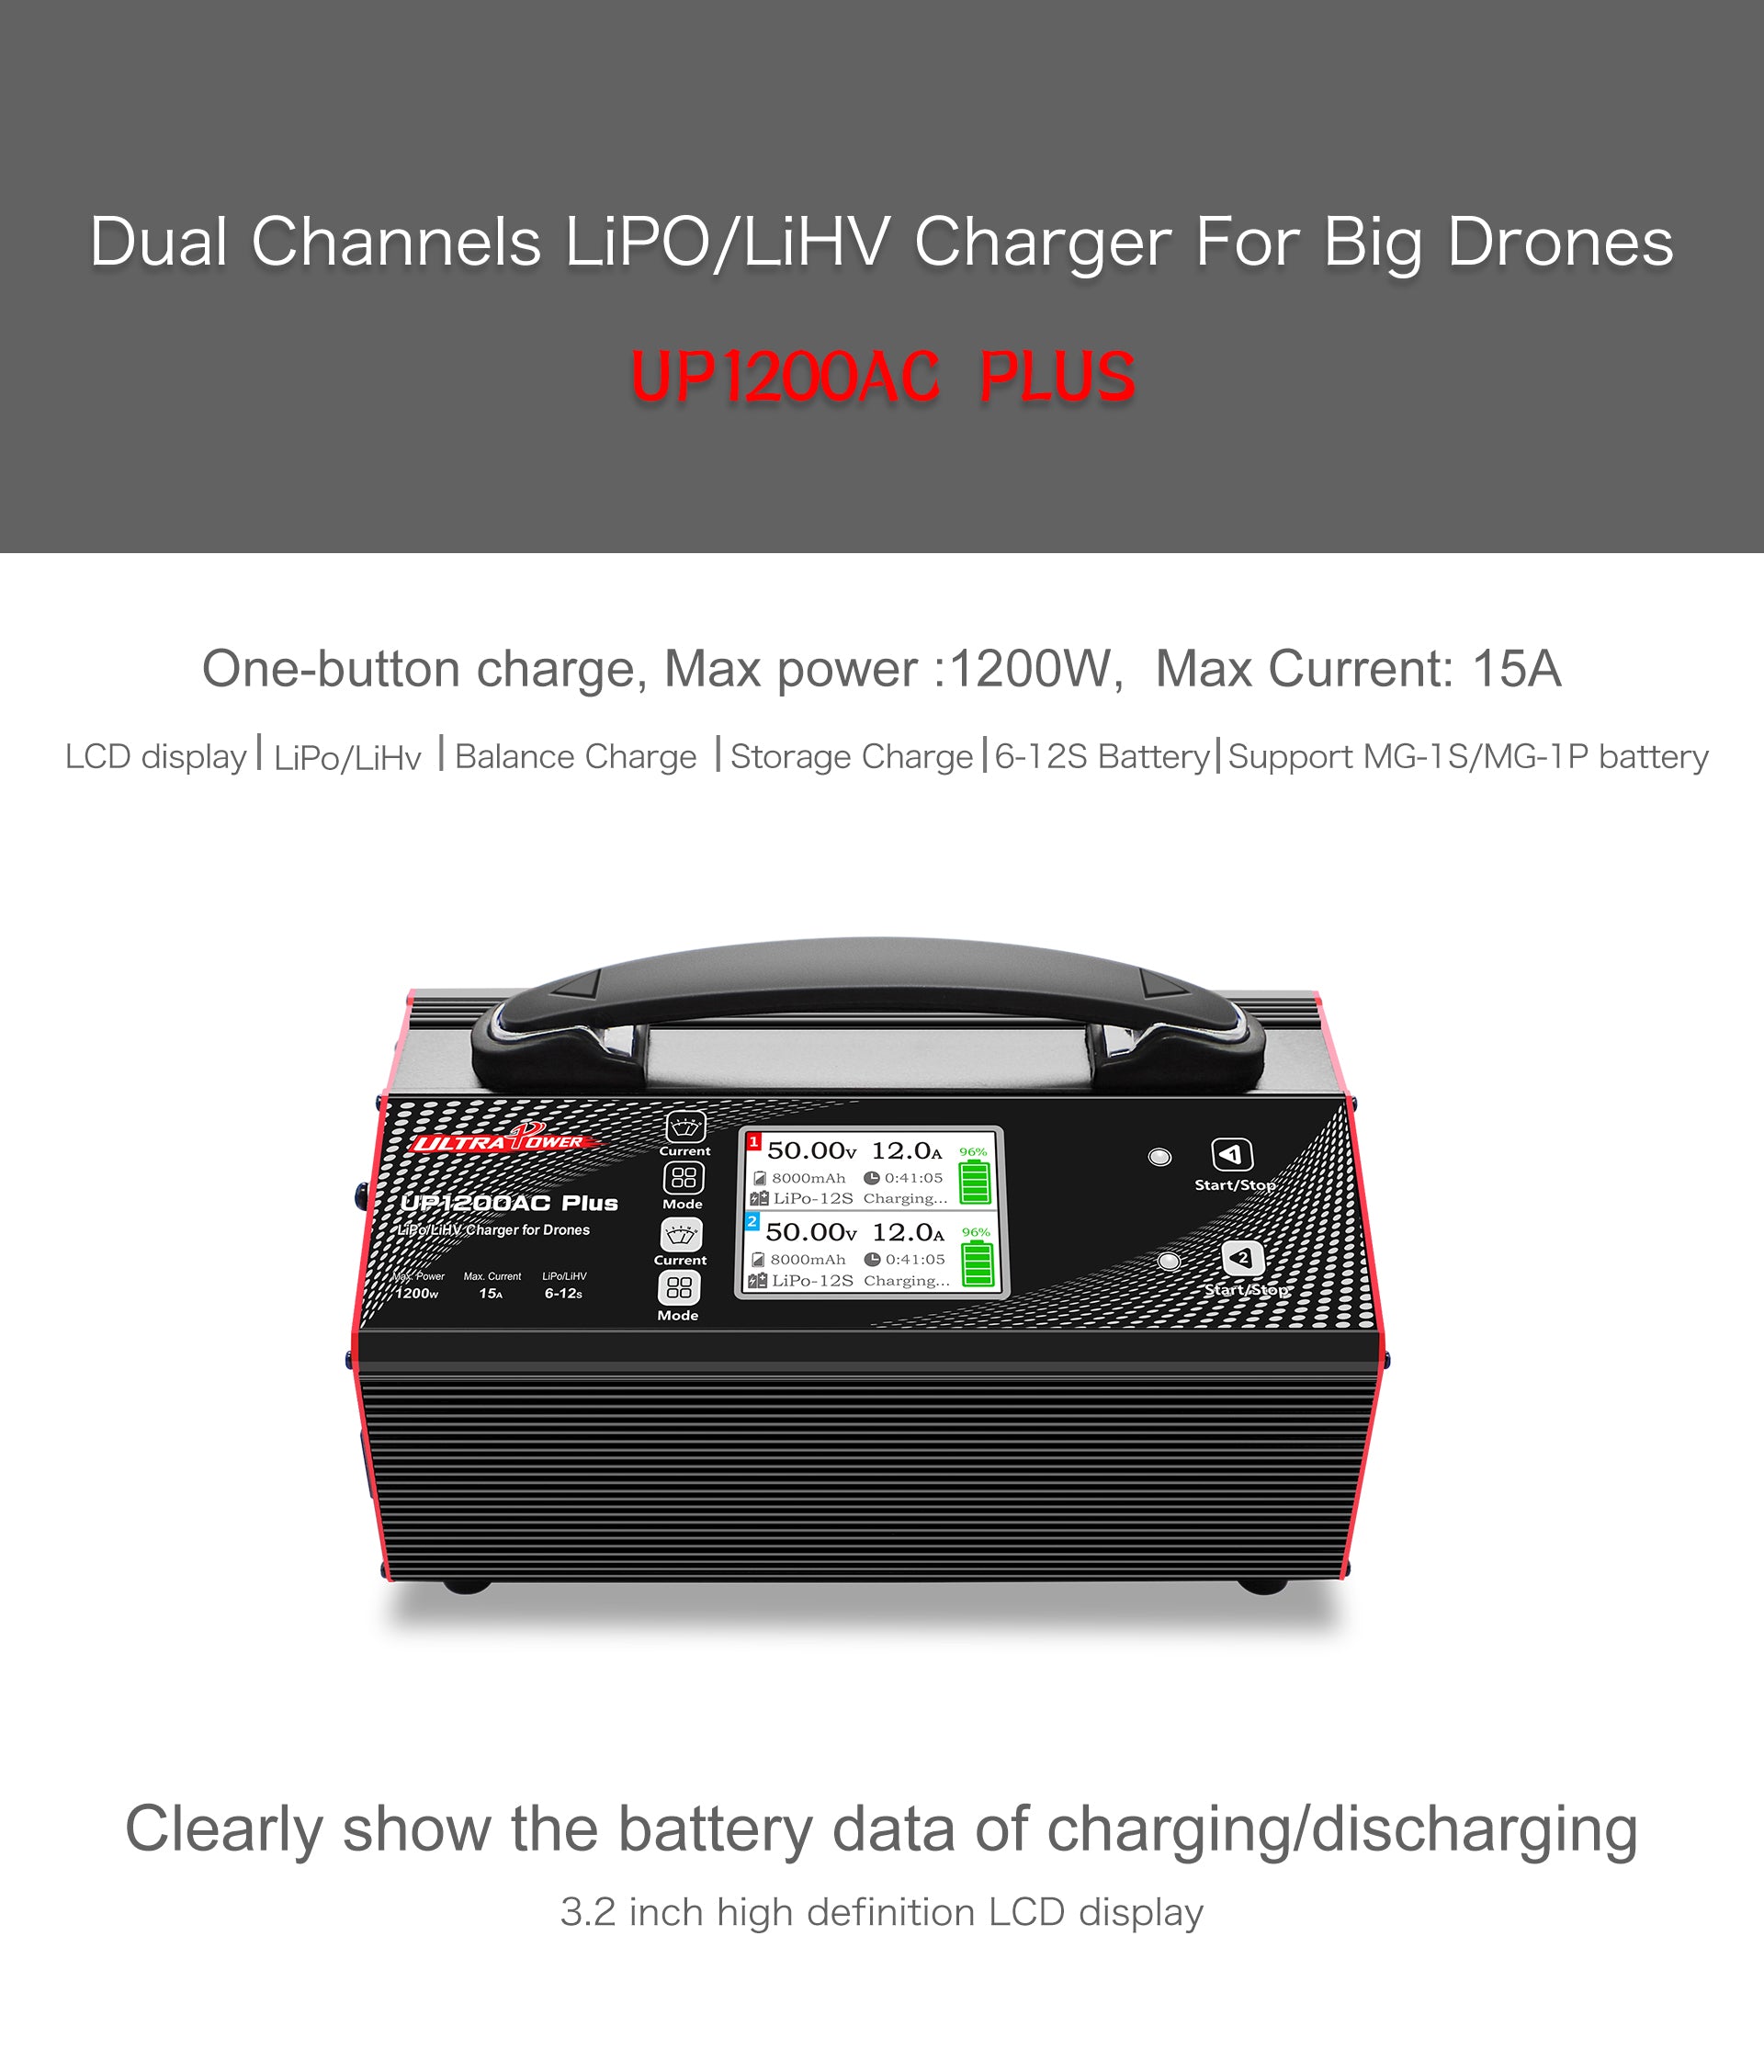 UP1200AC PLUS 2X600W 15A 6-12S Battery UAV Drone Charger